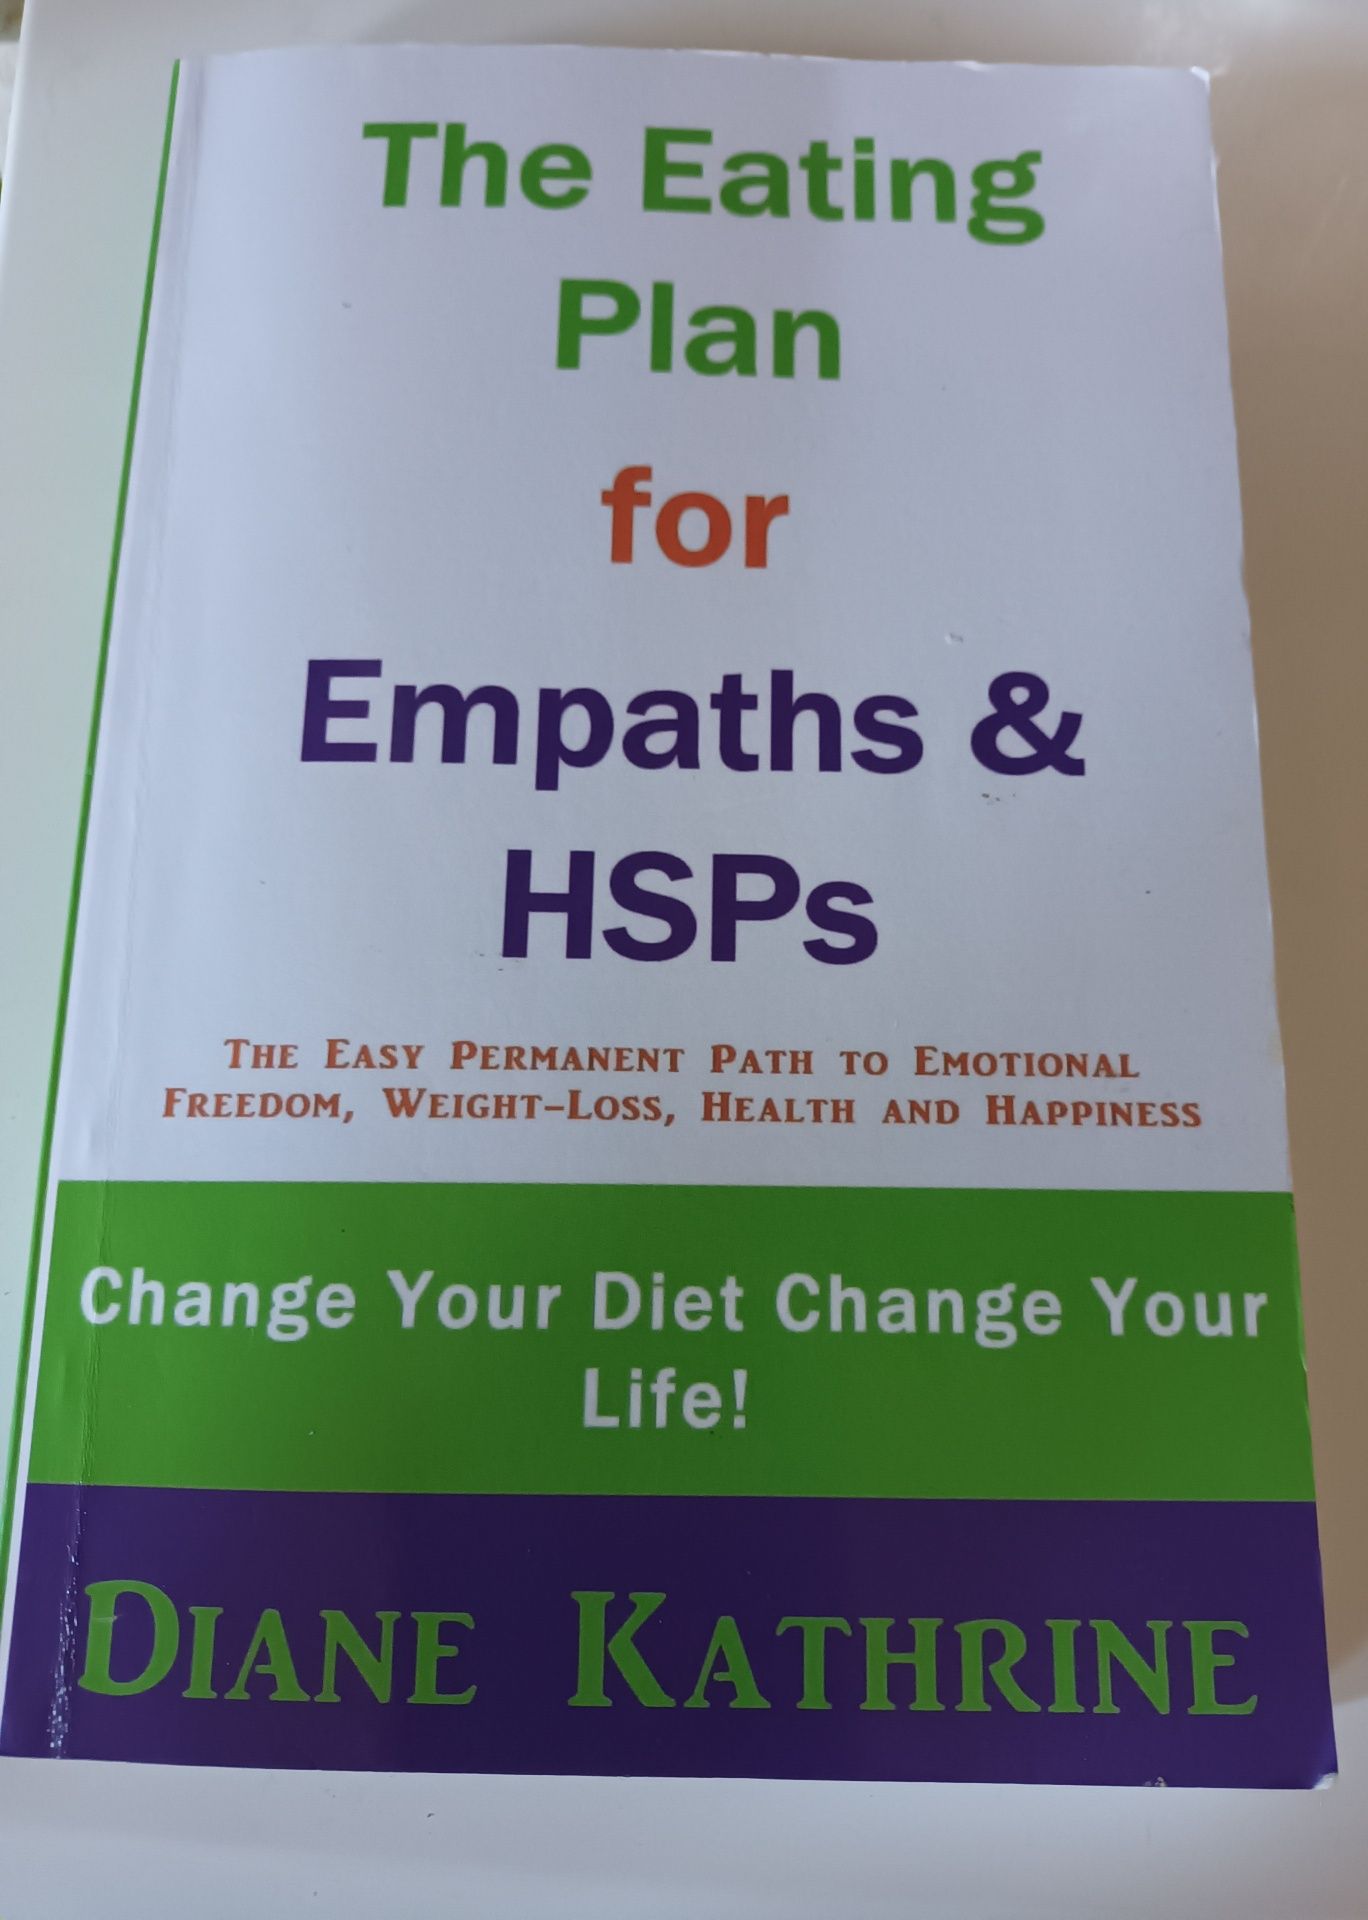 The Eating Plan for Empaths & Hsps: Change Your Diet Change Your Life!